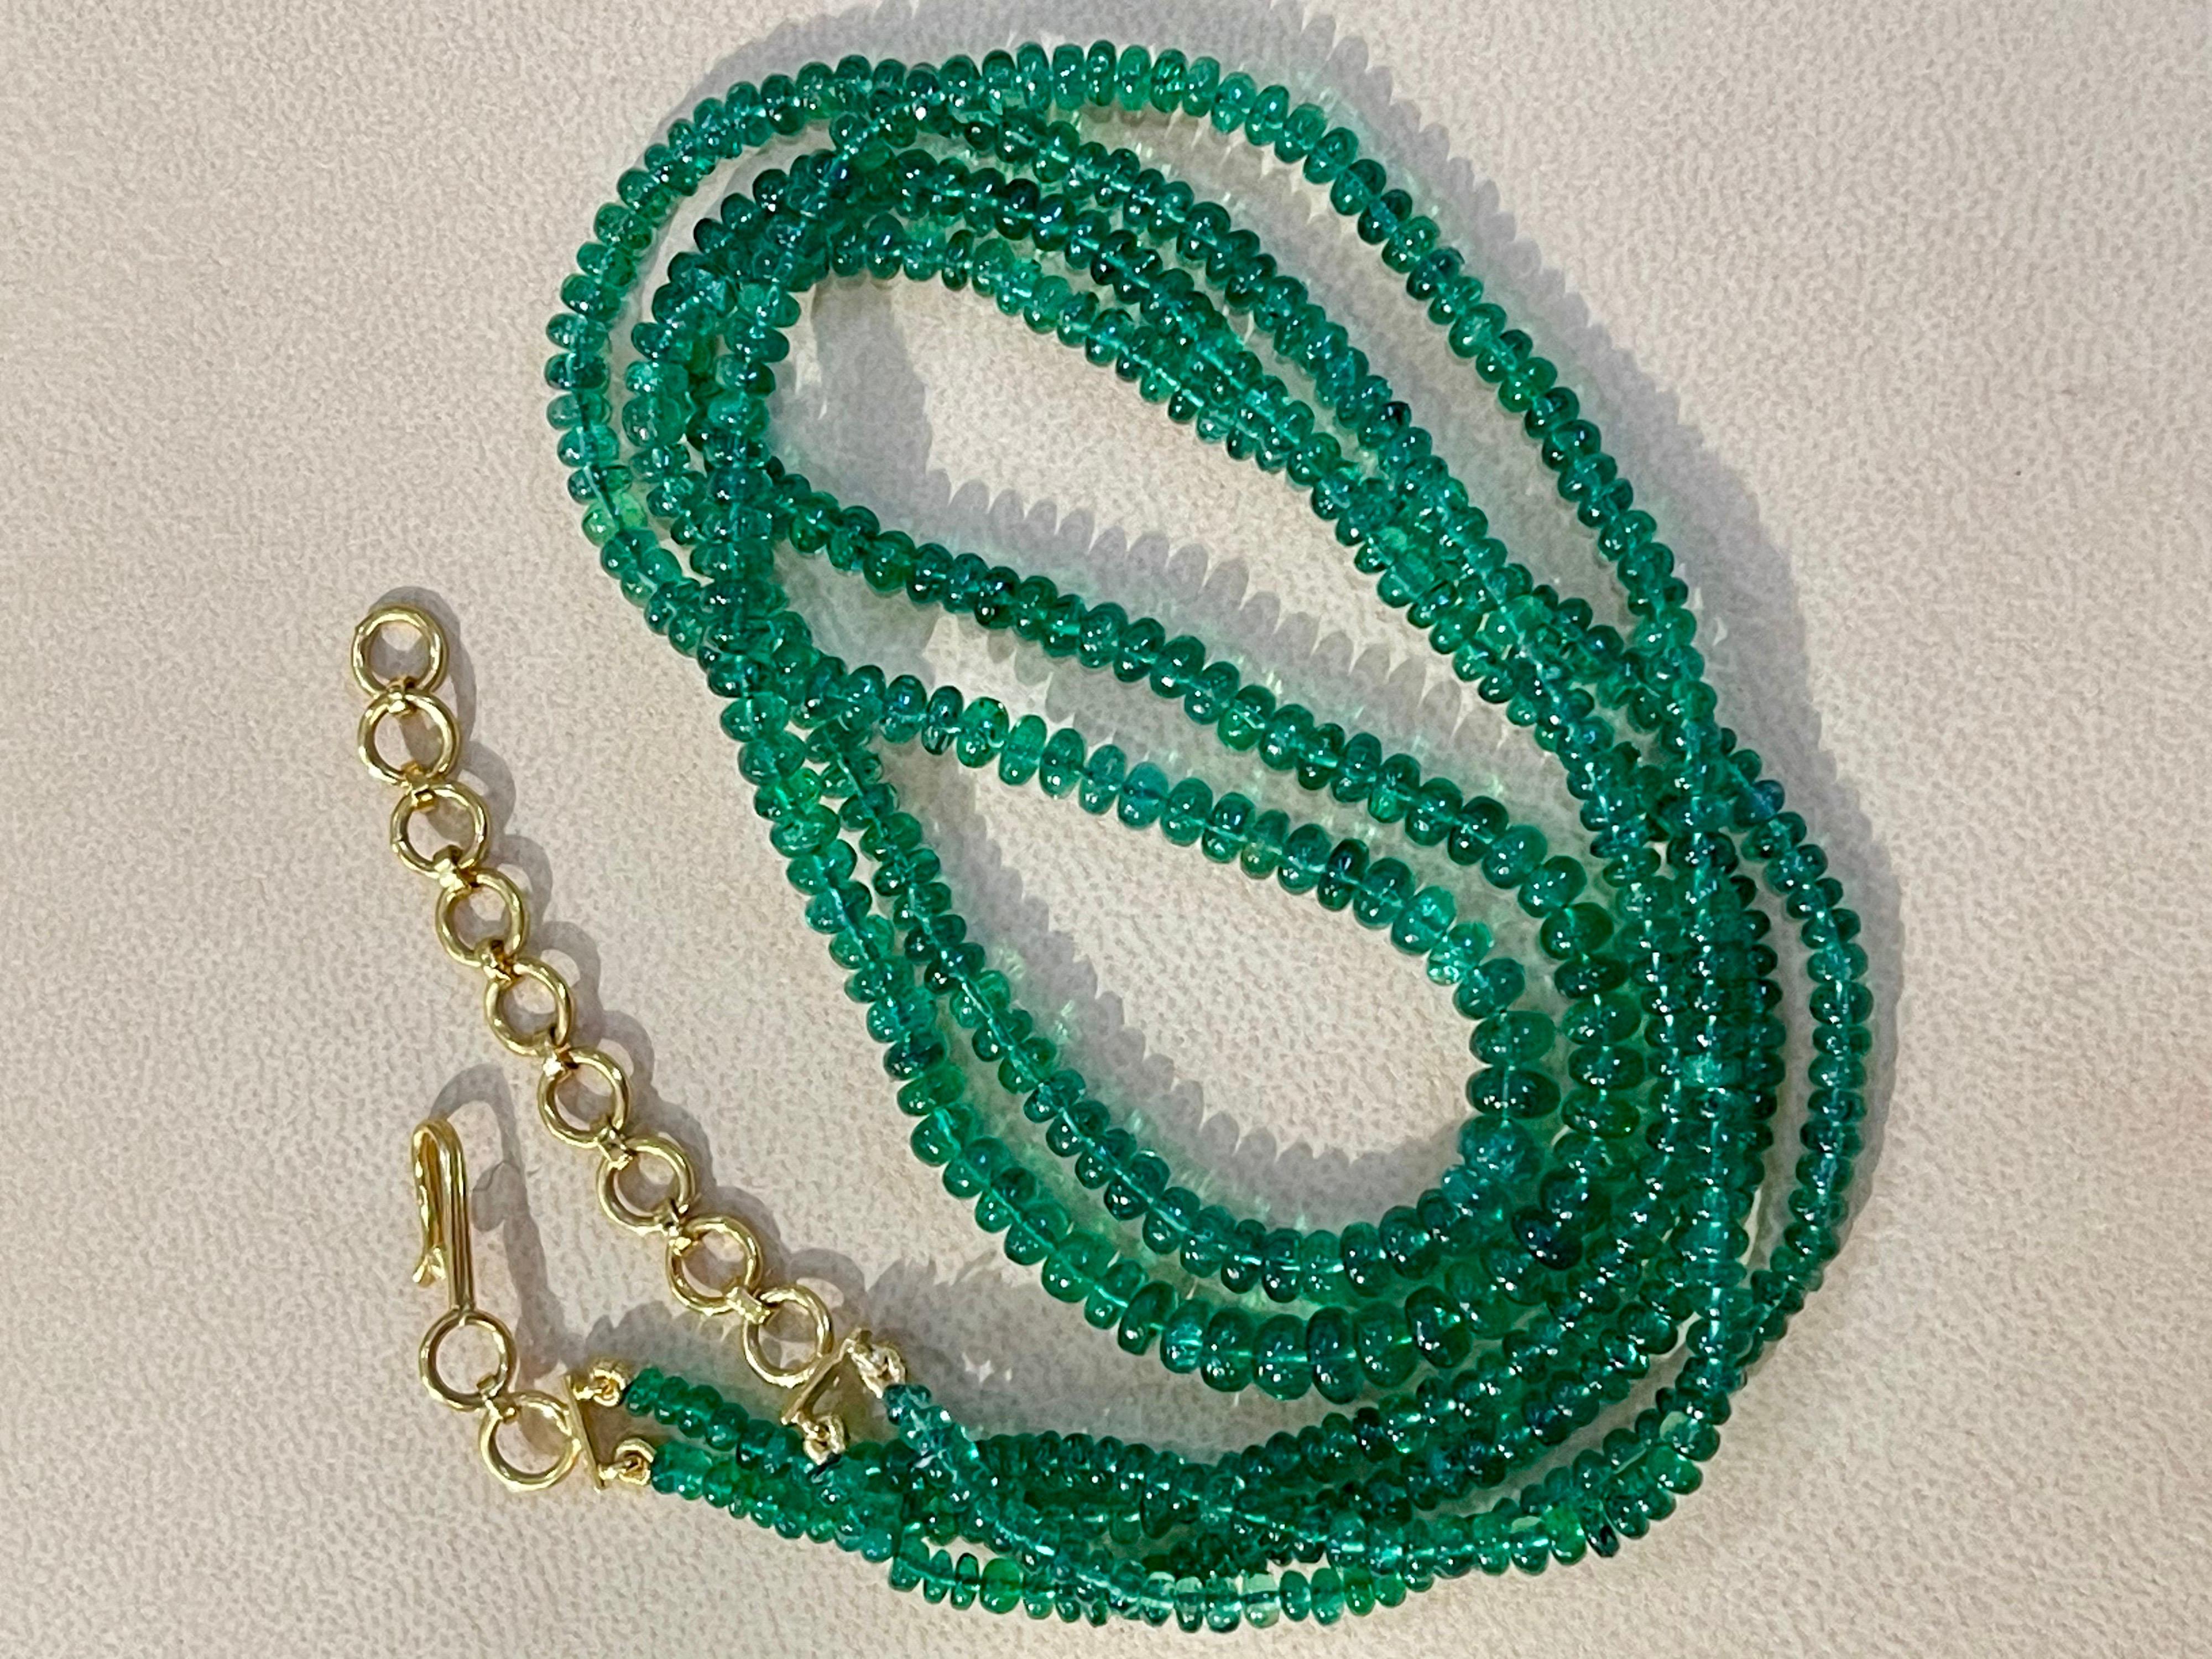 125ct Fine Emerald Beads 2 Line Necklace with 14 Kt Yellow Gold Clasp Adjustable 9